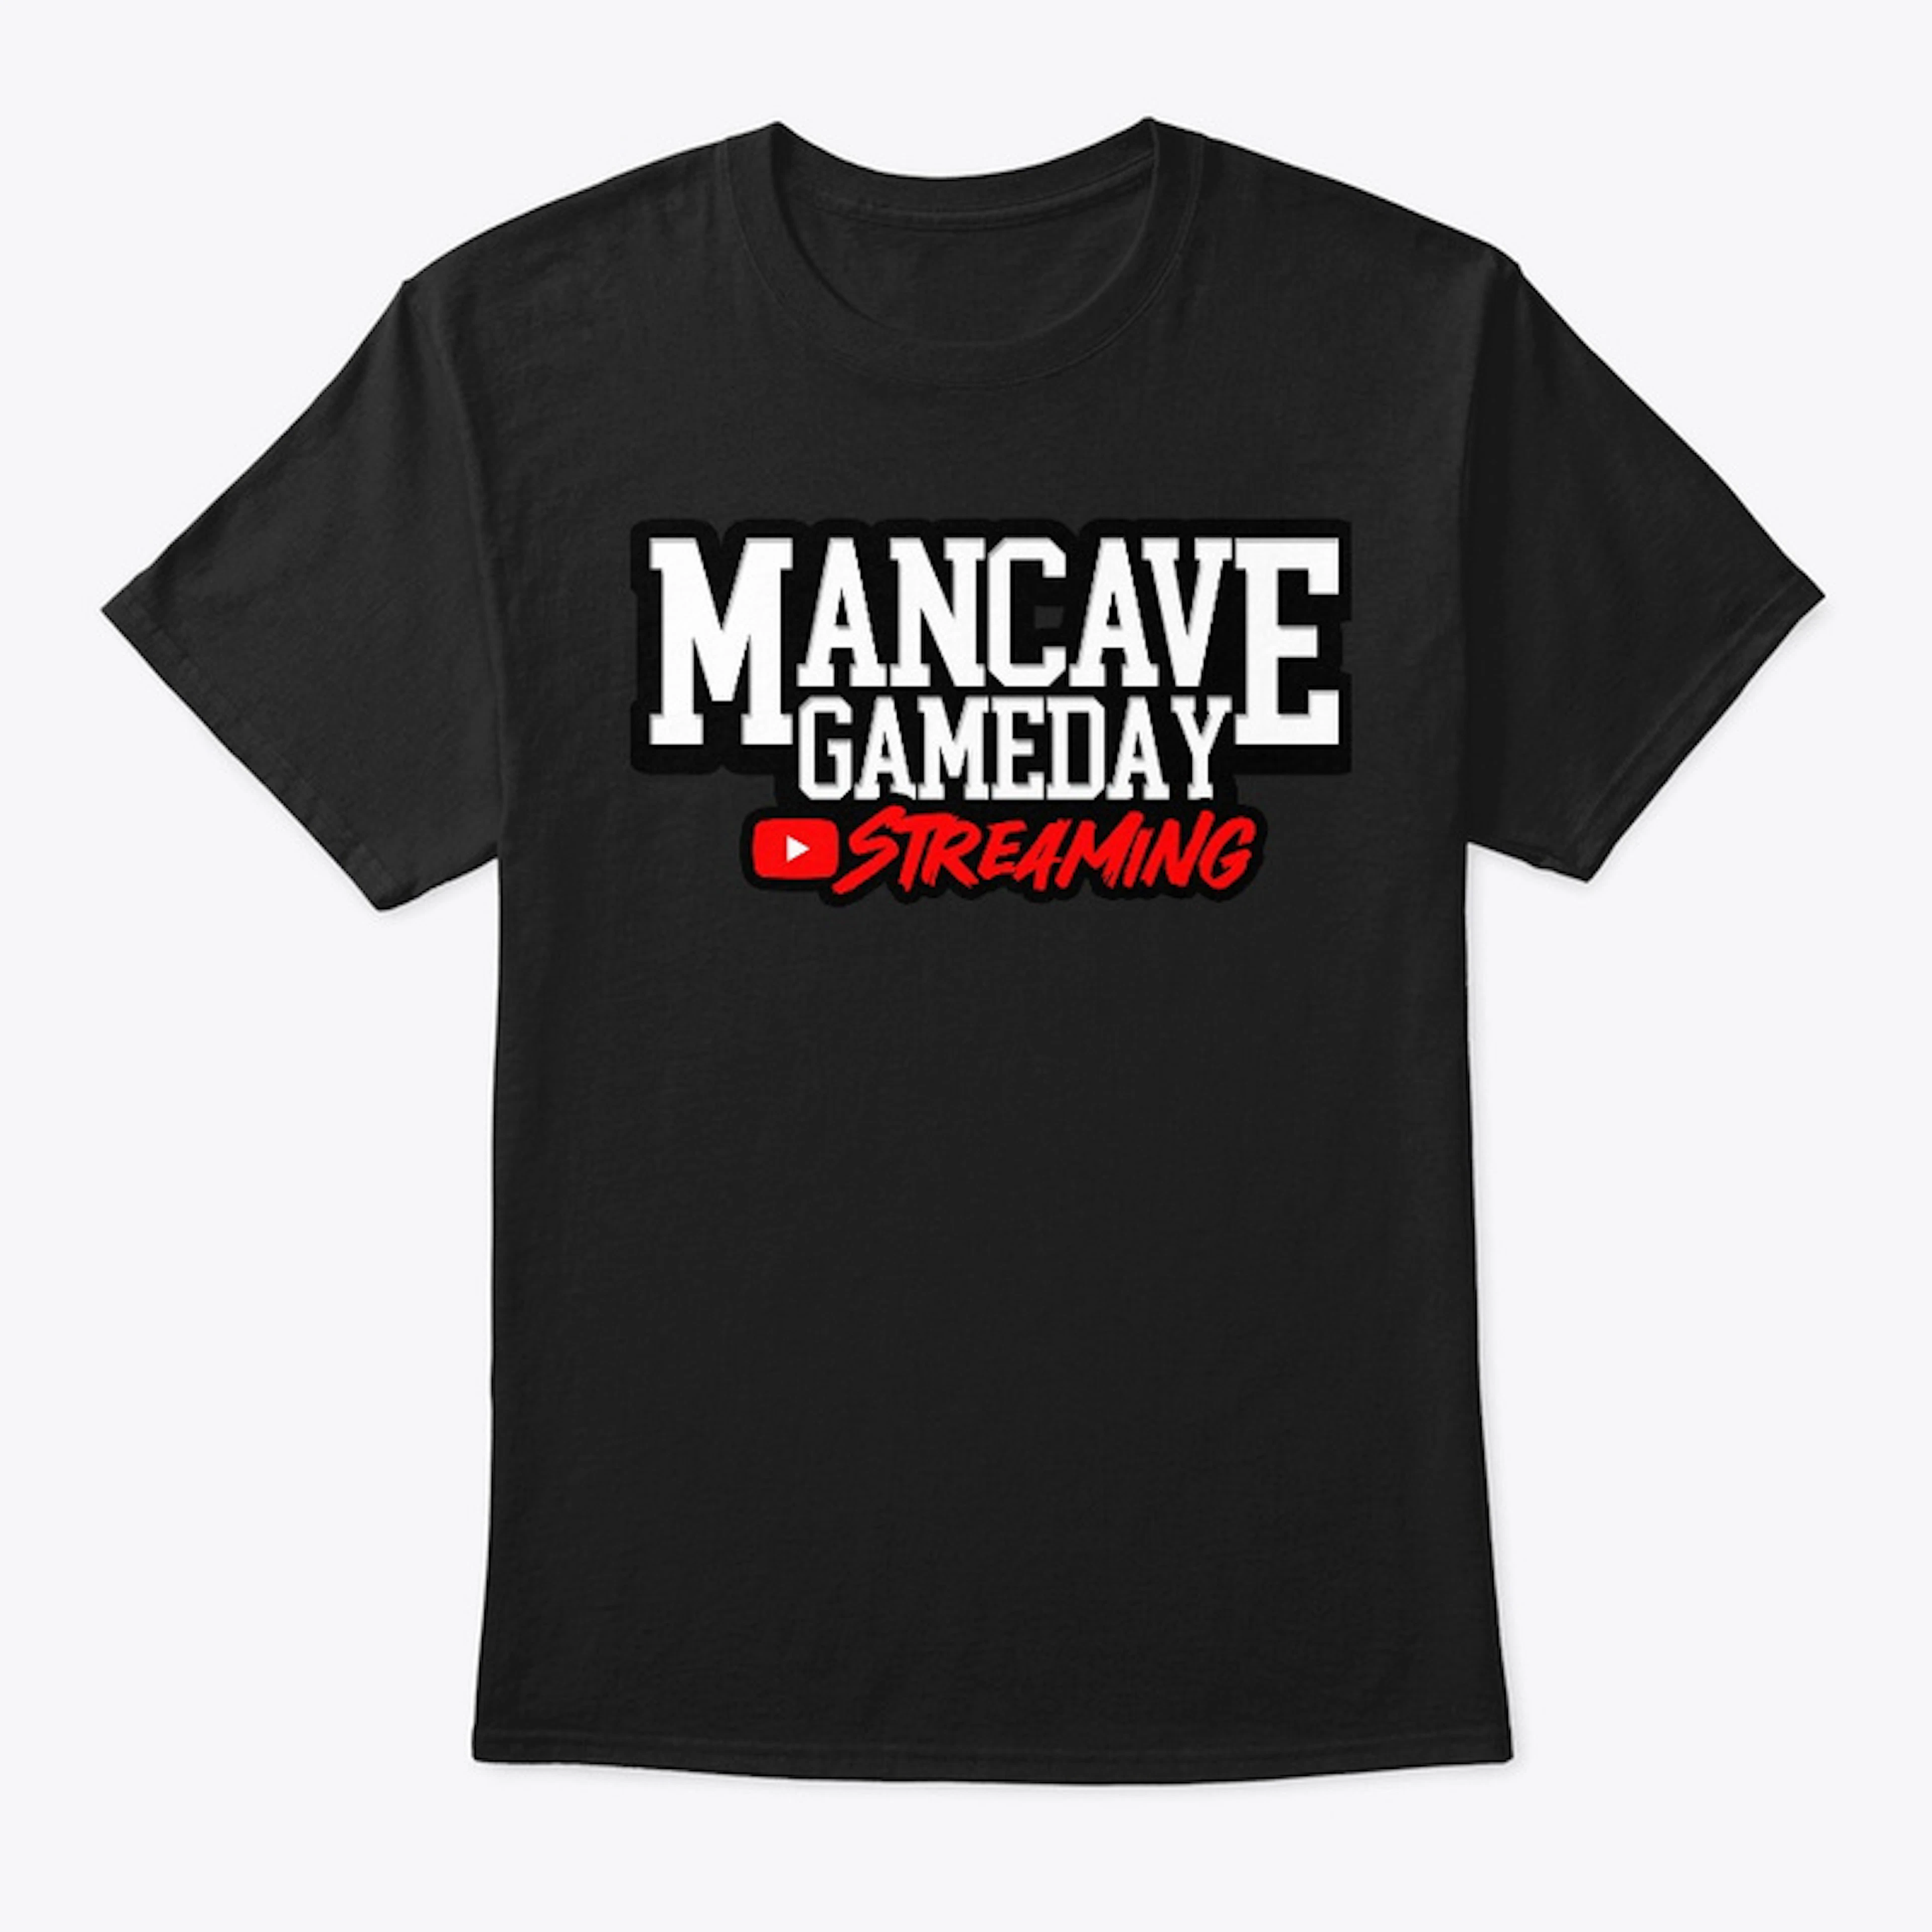 THE MANCAVE GAMEDAY STREAMING 